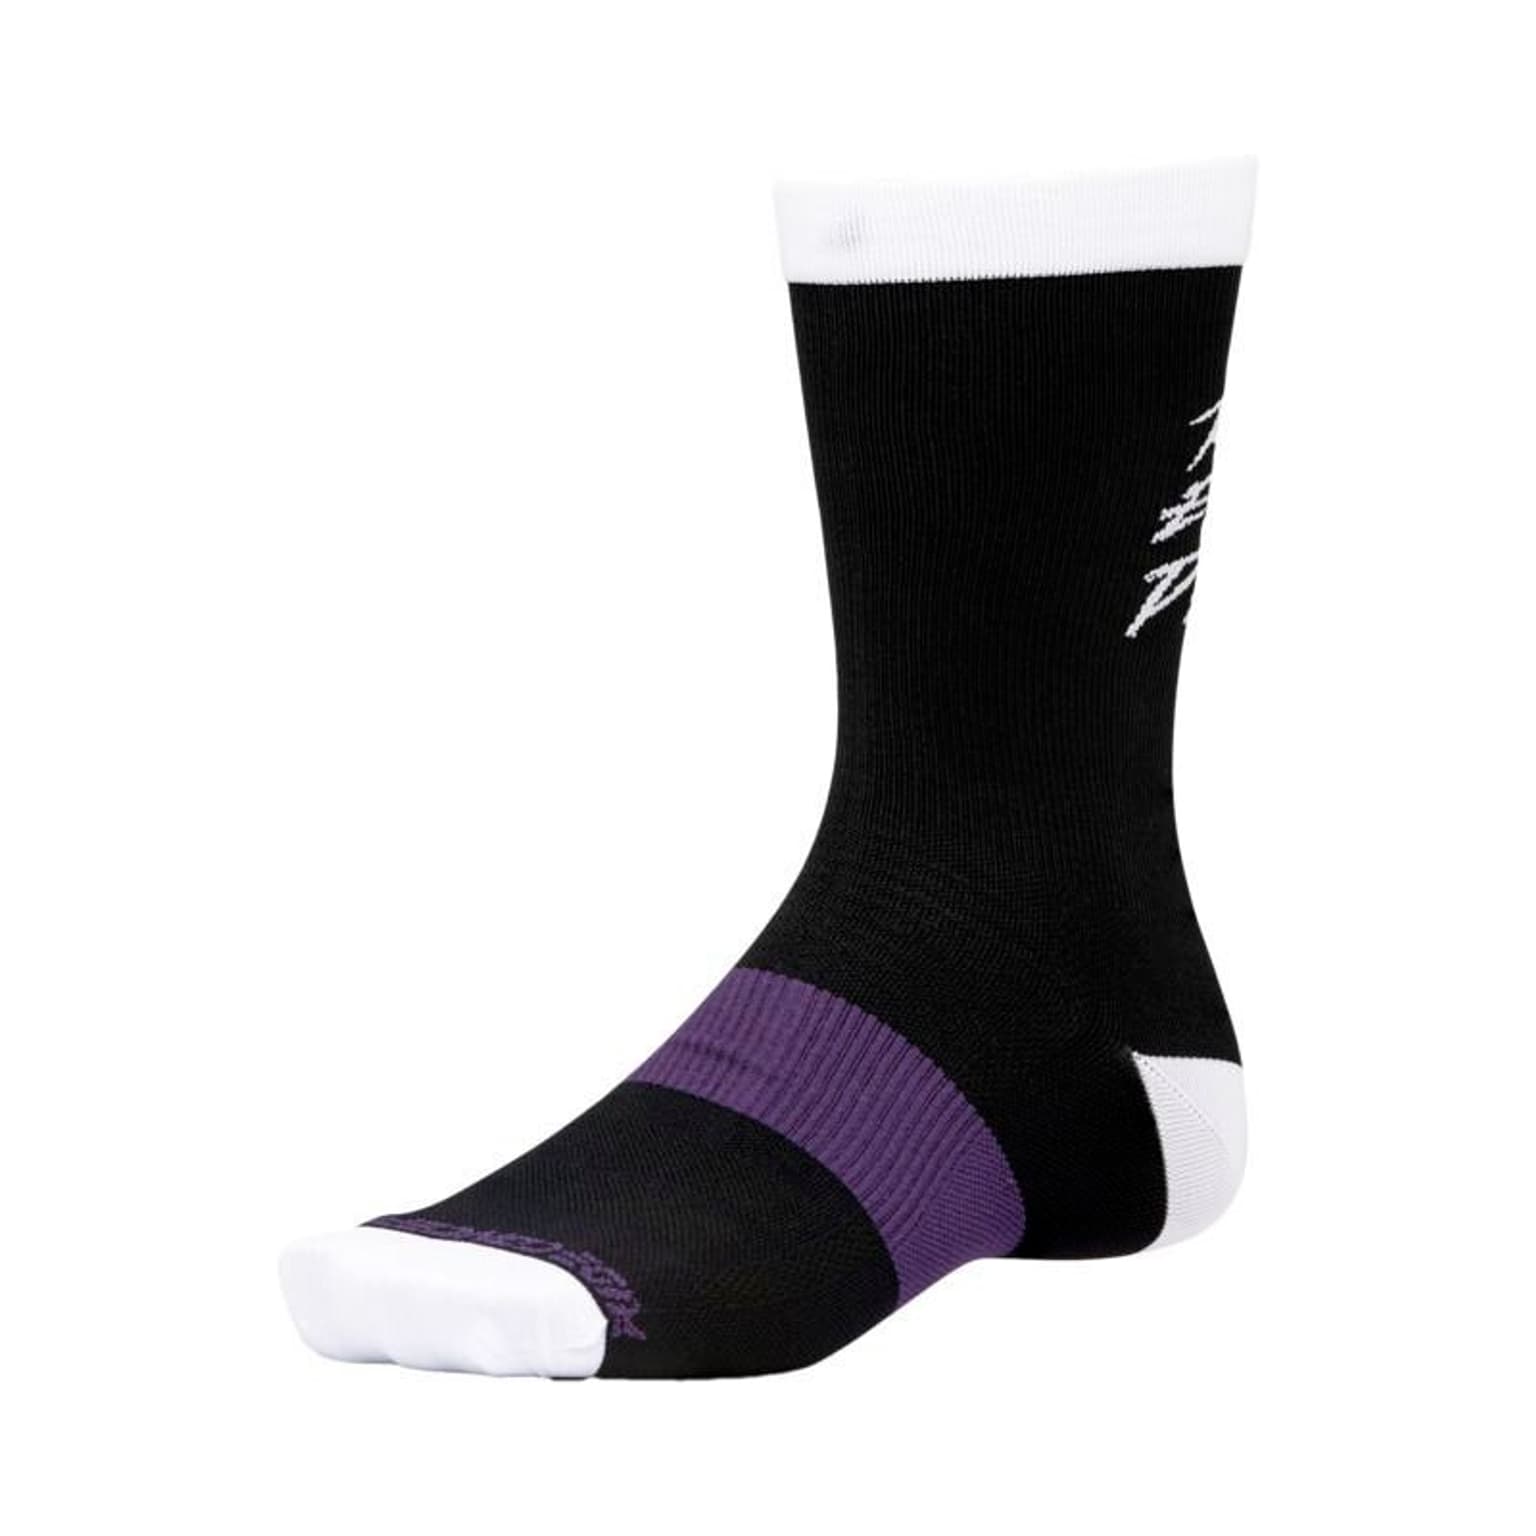 Ride Concepts Ride Concepts Ride Every Day Synthetic Velosocken weiss 2